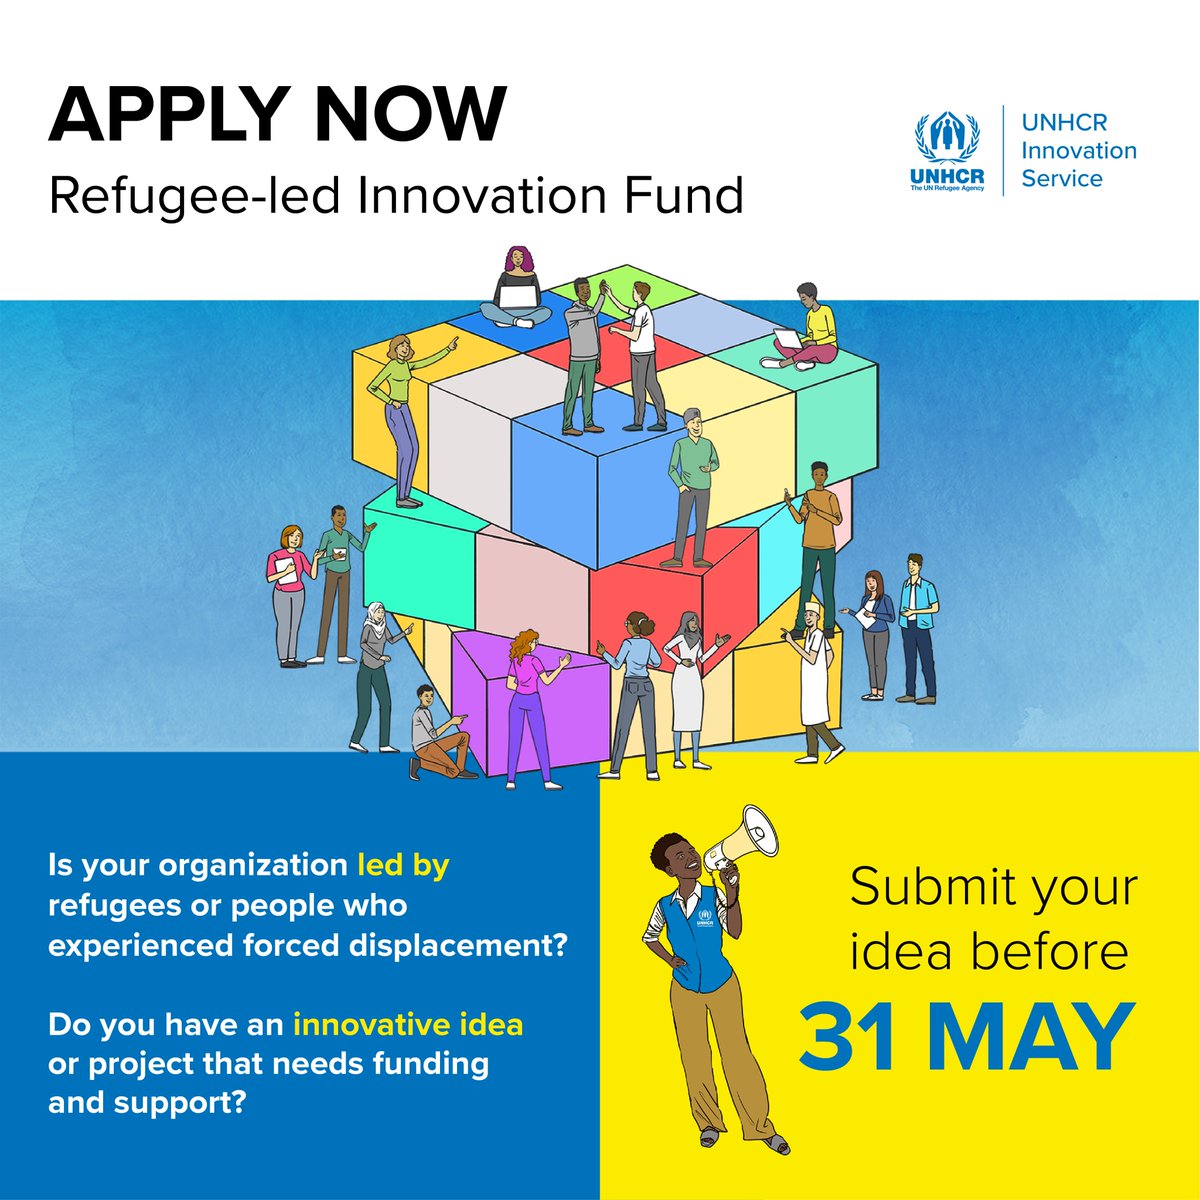 Refugees are best placed to understand the challenges they face and design solutions to those challenges. UNHCR’s Refugee-led Innovation Fund gives organizations led by refugees the right support to be changemakers in their communities. Apply NOW! bit.ly/3QkHRey